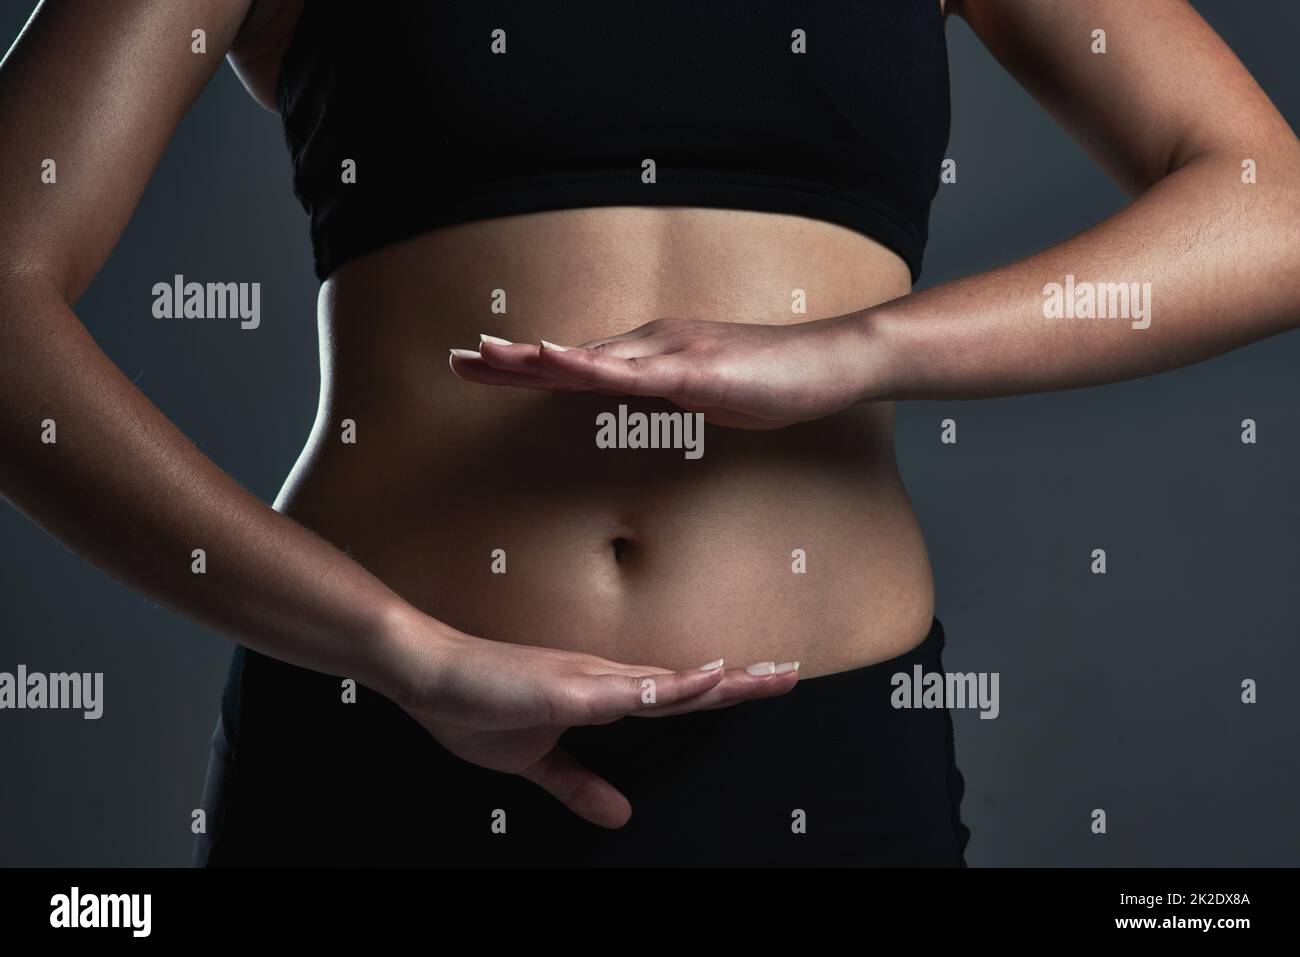 Keeping it healthy and balanced. Closeup shot of a sporty womans midsection. Stock Photo